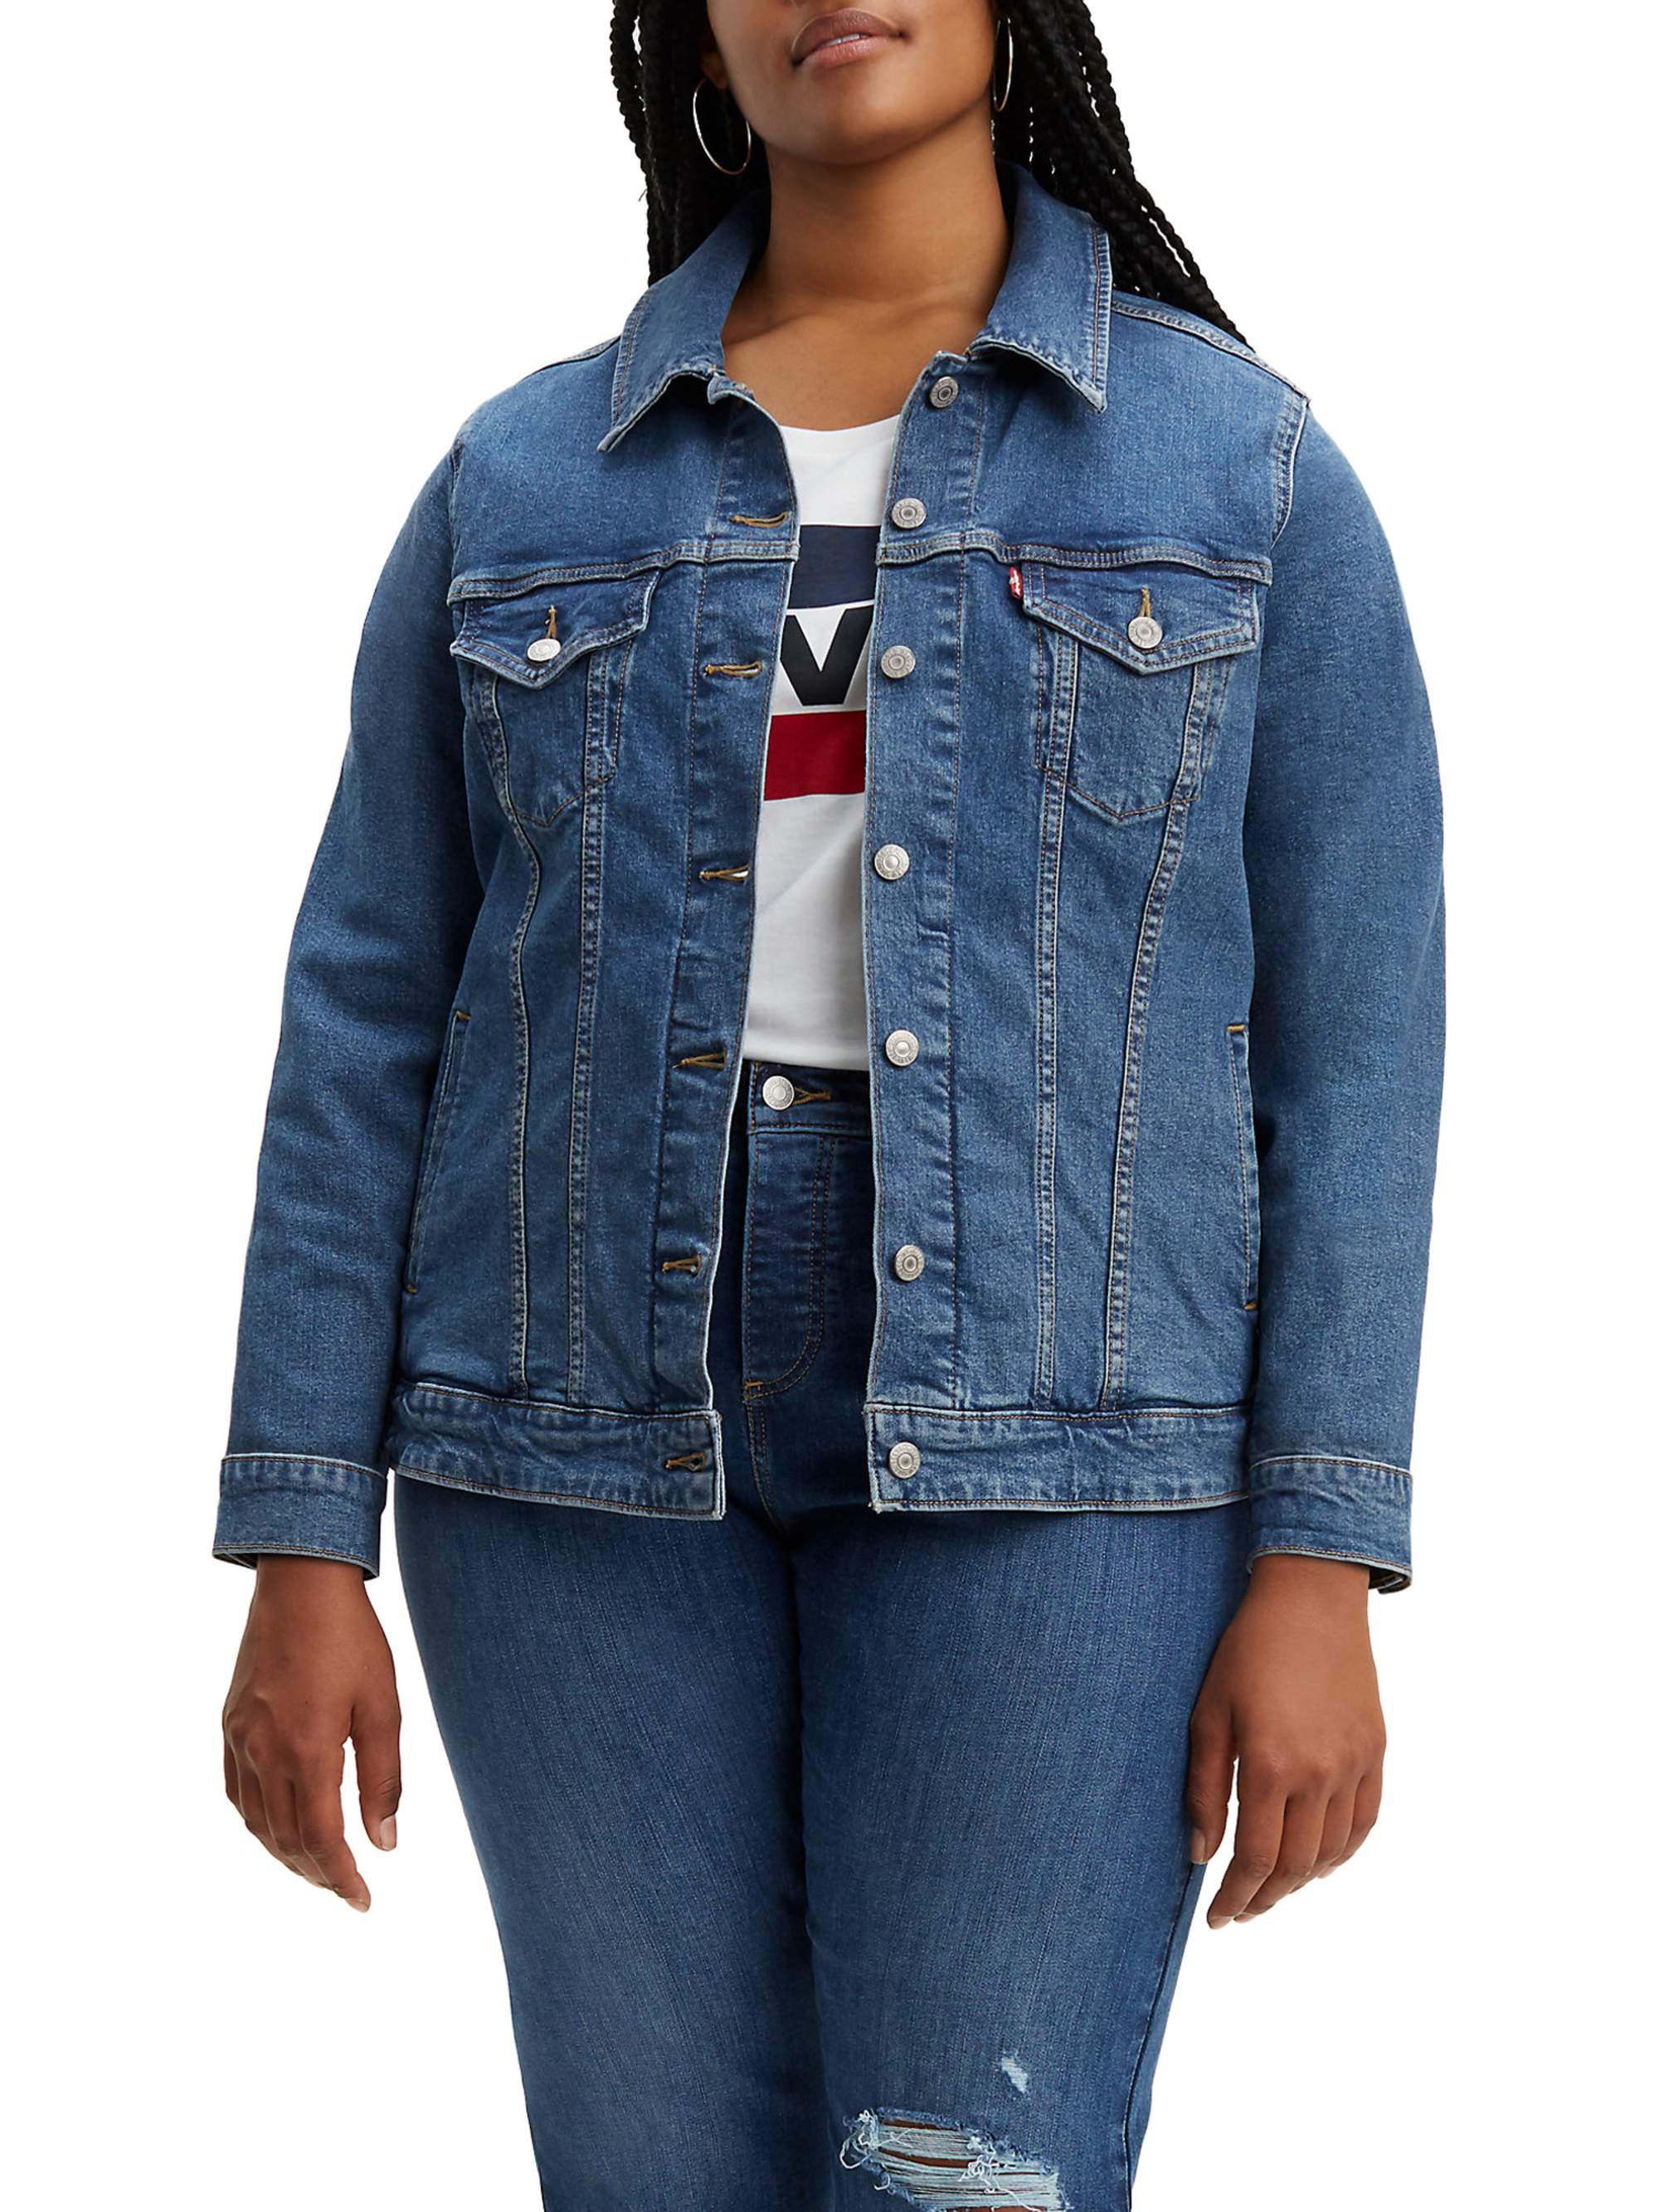 Top more than 80 levis womens jacket size guide super hot - in ...